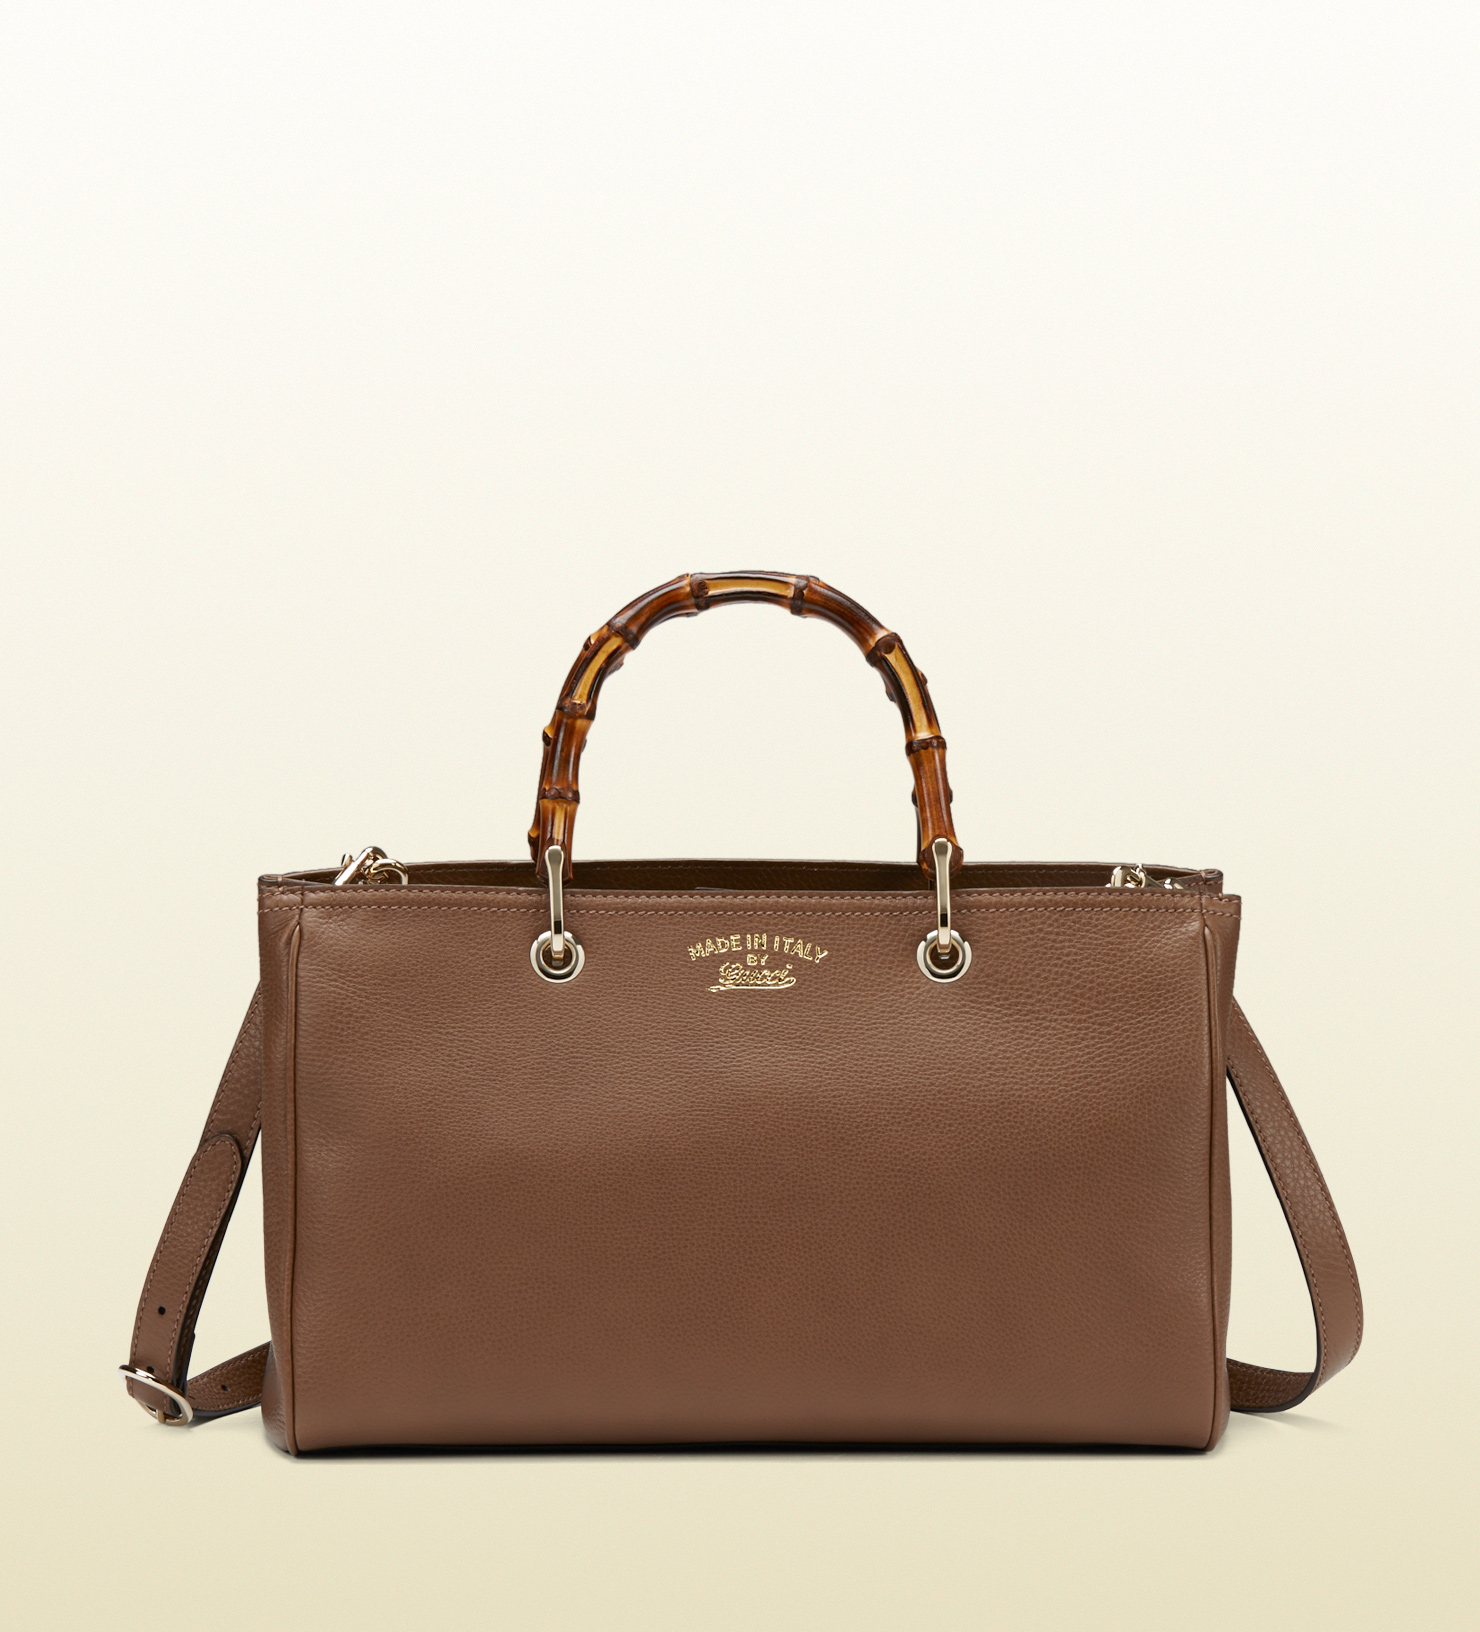 Lyst iGuccii Bamboo Shopper Leather iTotei in Brown